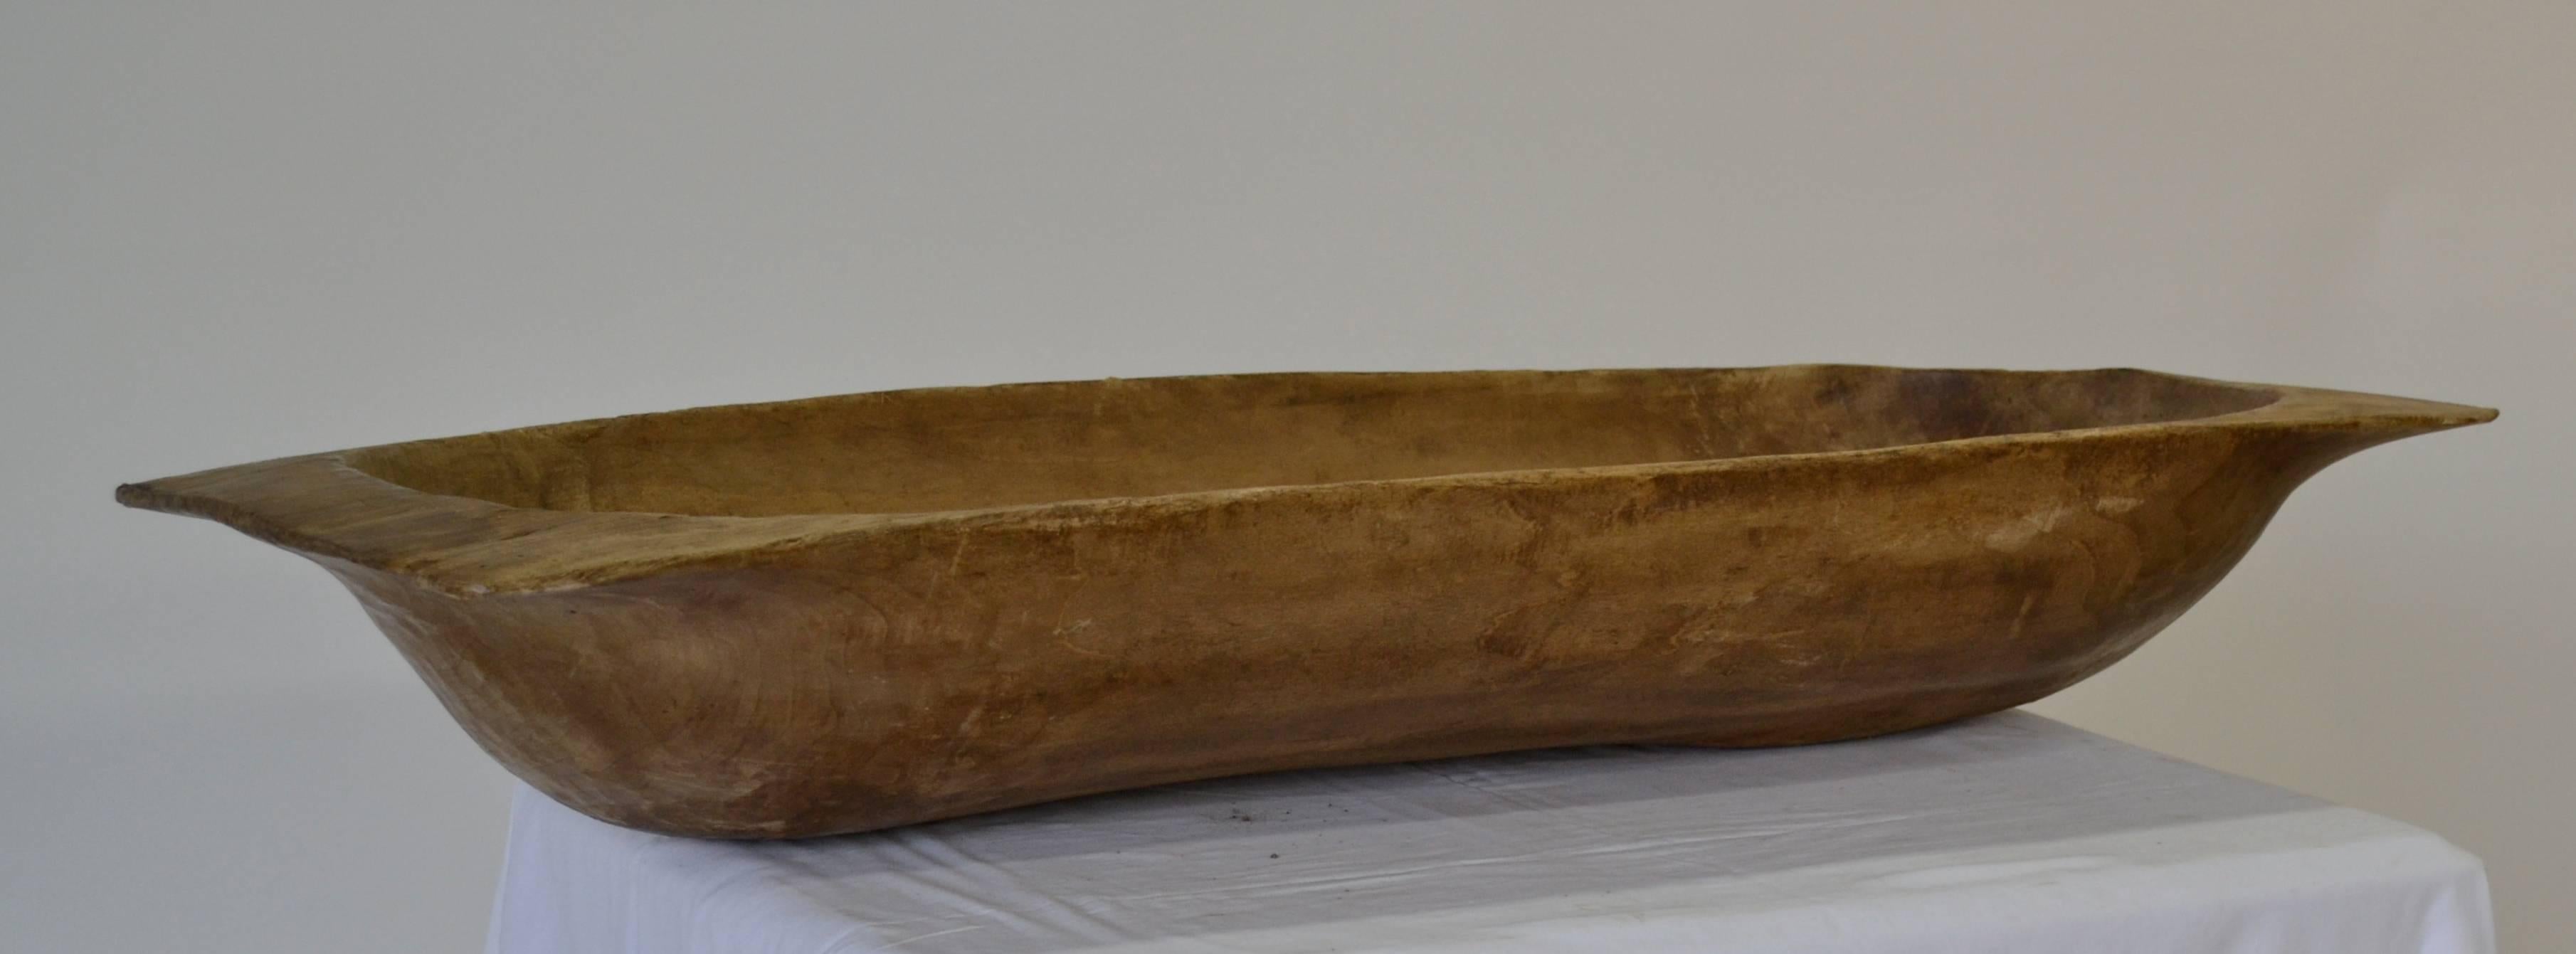 An attractive antique dough bowl or trog, beautifully hand-carved from a split log.  Great as a centerpiece or as a catch-all by the door to toss in scarves and gloves, or use for keeping kindling, logs, magazines by the fire.
This one is